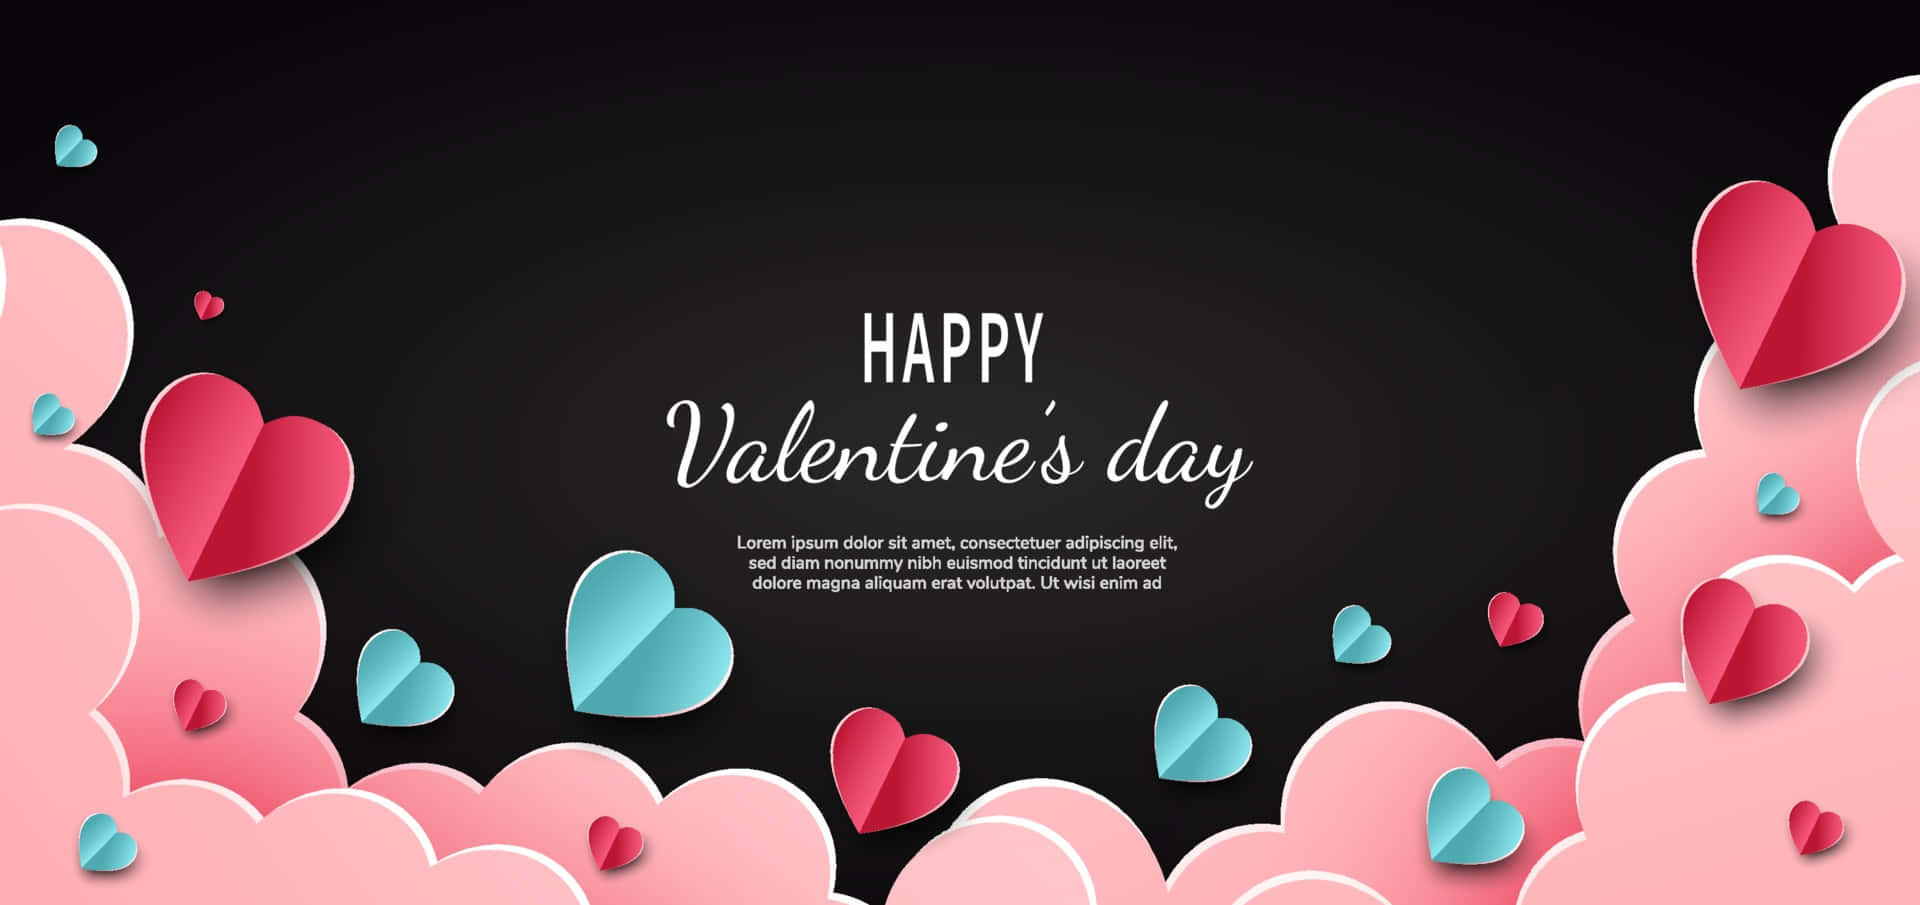 Cloudy Happy Valentine Background Greeting Background